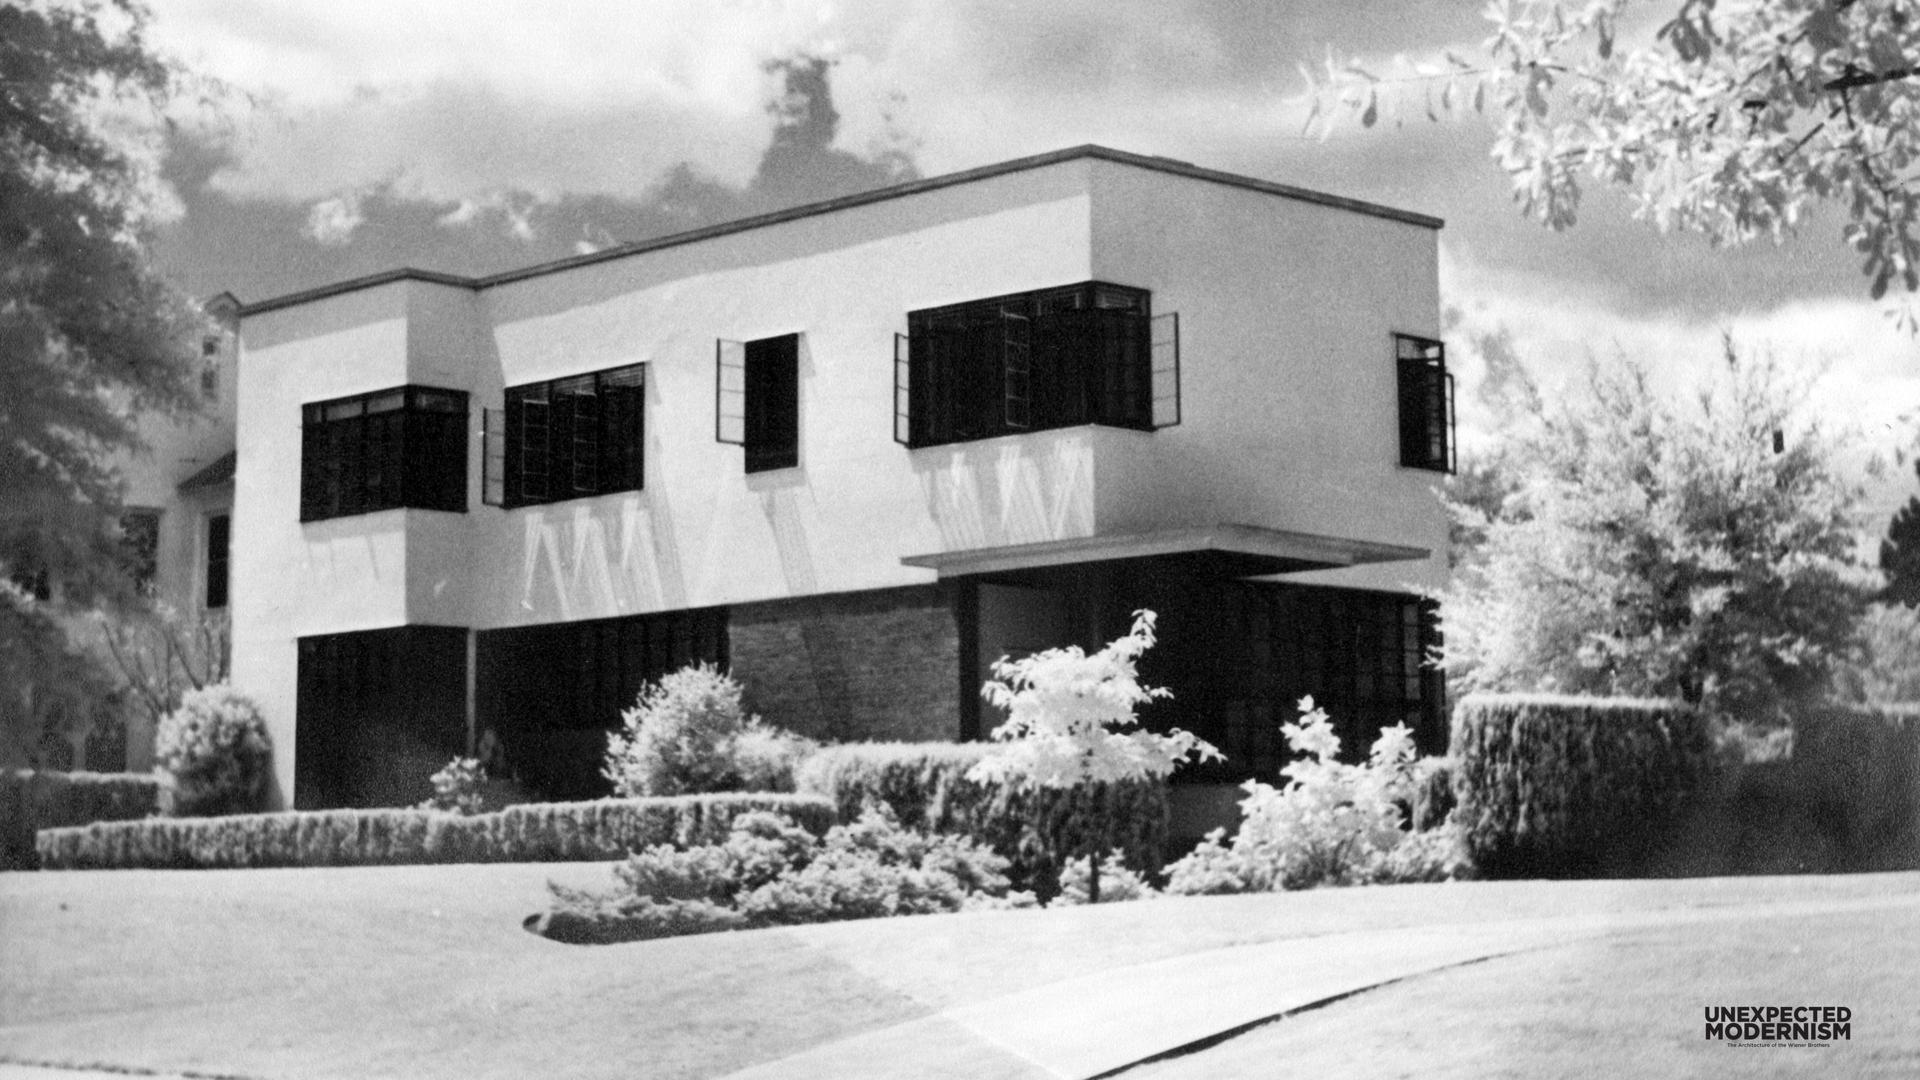 Unexpected Modernism: The Wiener Brothers Story presented by Louisiana Architecture Foundation